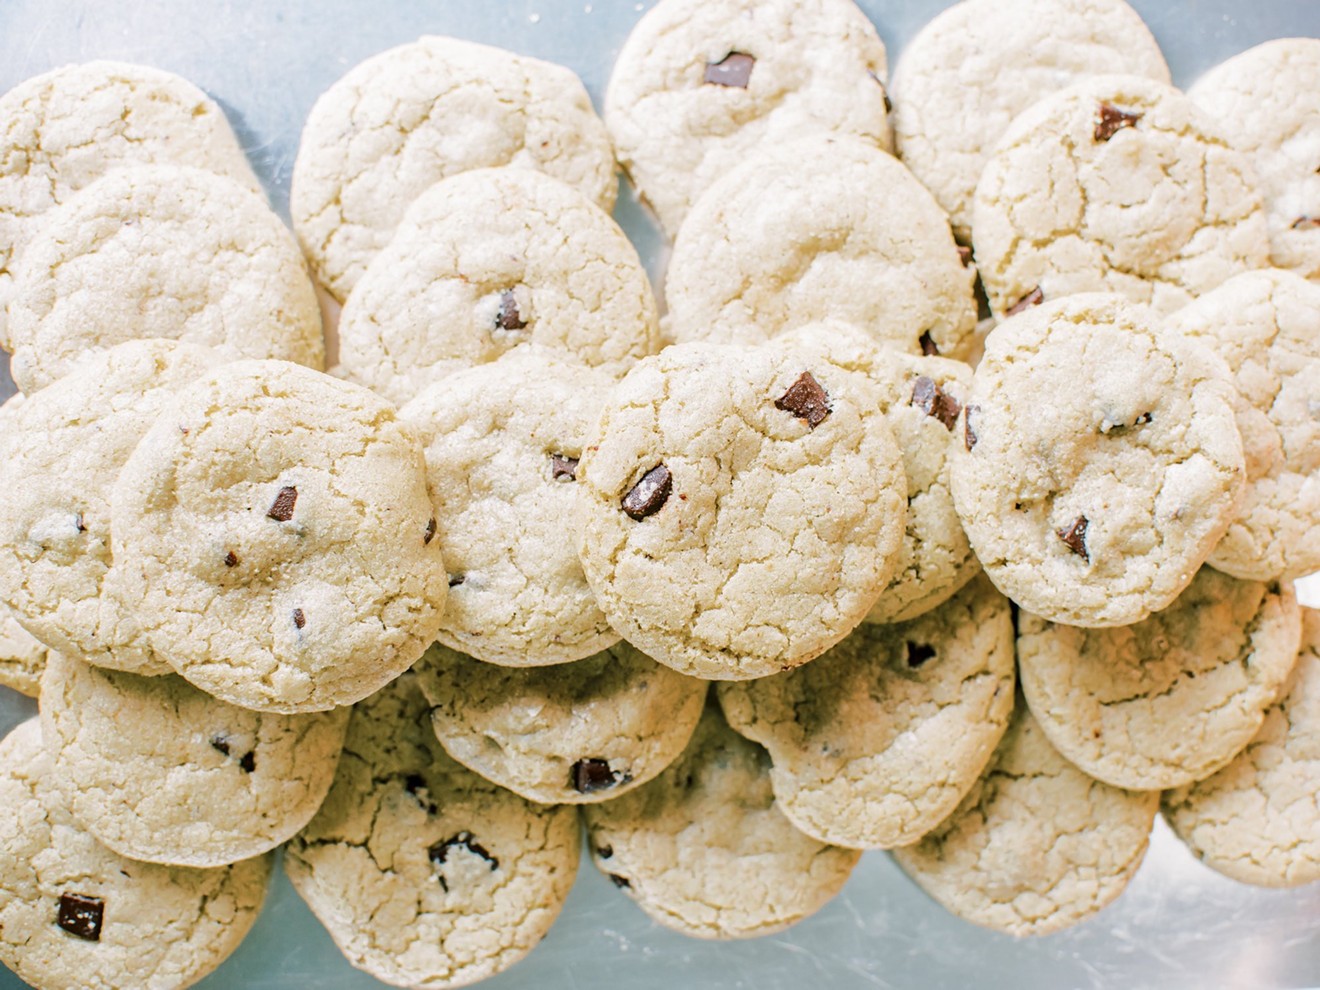 Today is a good day for a mound of cookies.